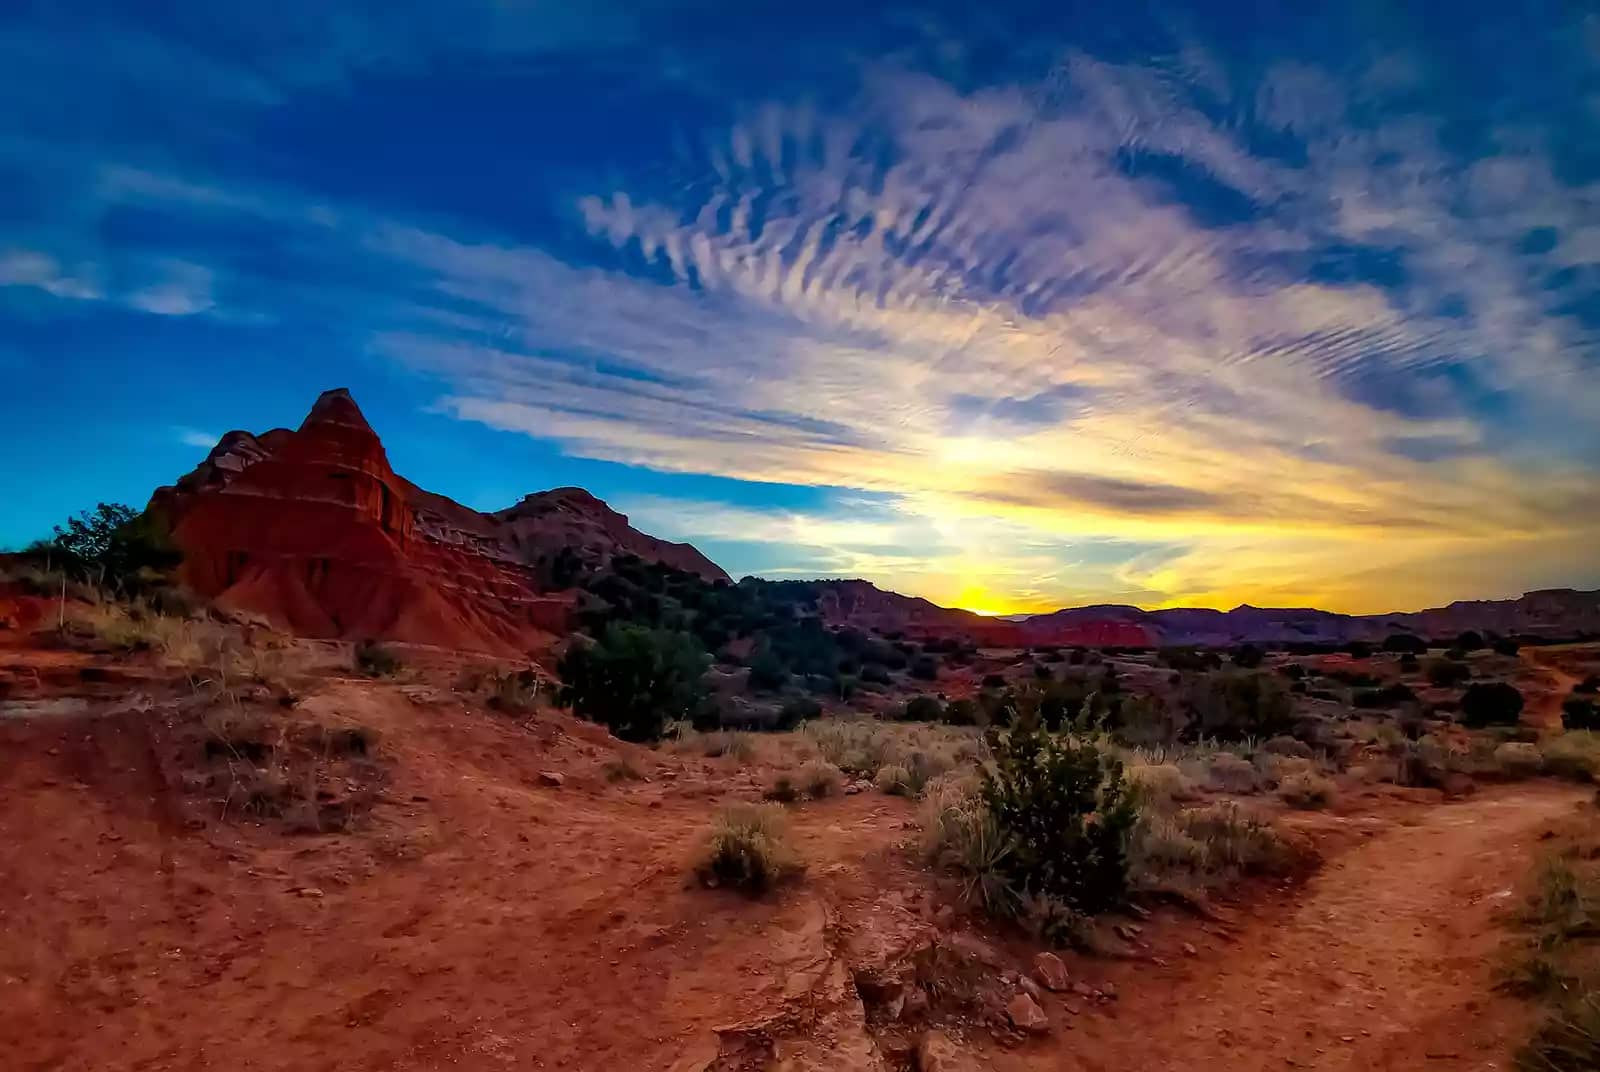 The rugged landscape of Palo Duro Canyon, a scenic stop on a Texas road trip, under a bright blue sky with illuminated clouds